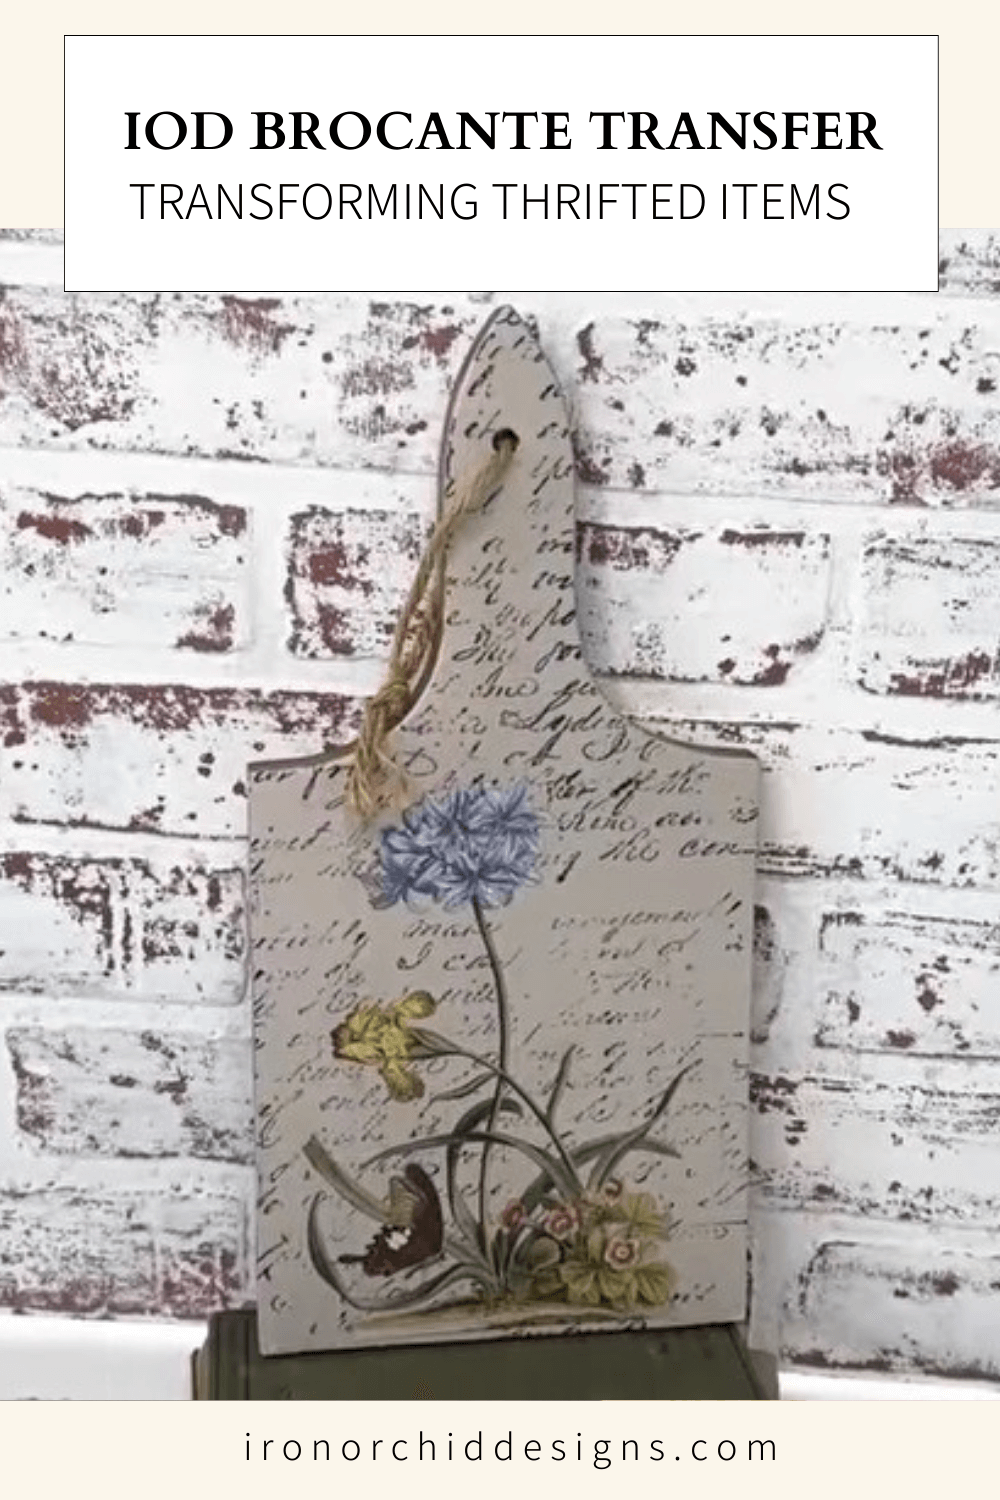 IOD Brocante Transfer: Transforming Thrifted Items Pinterest Pin Cover